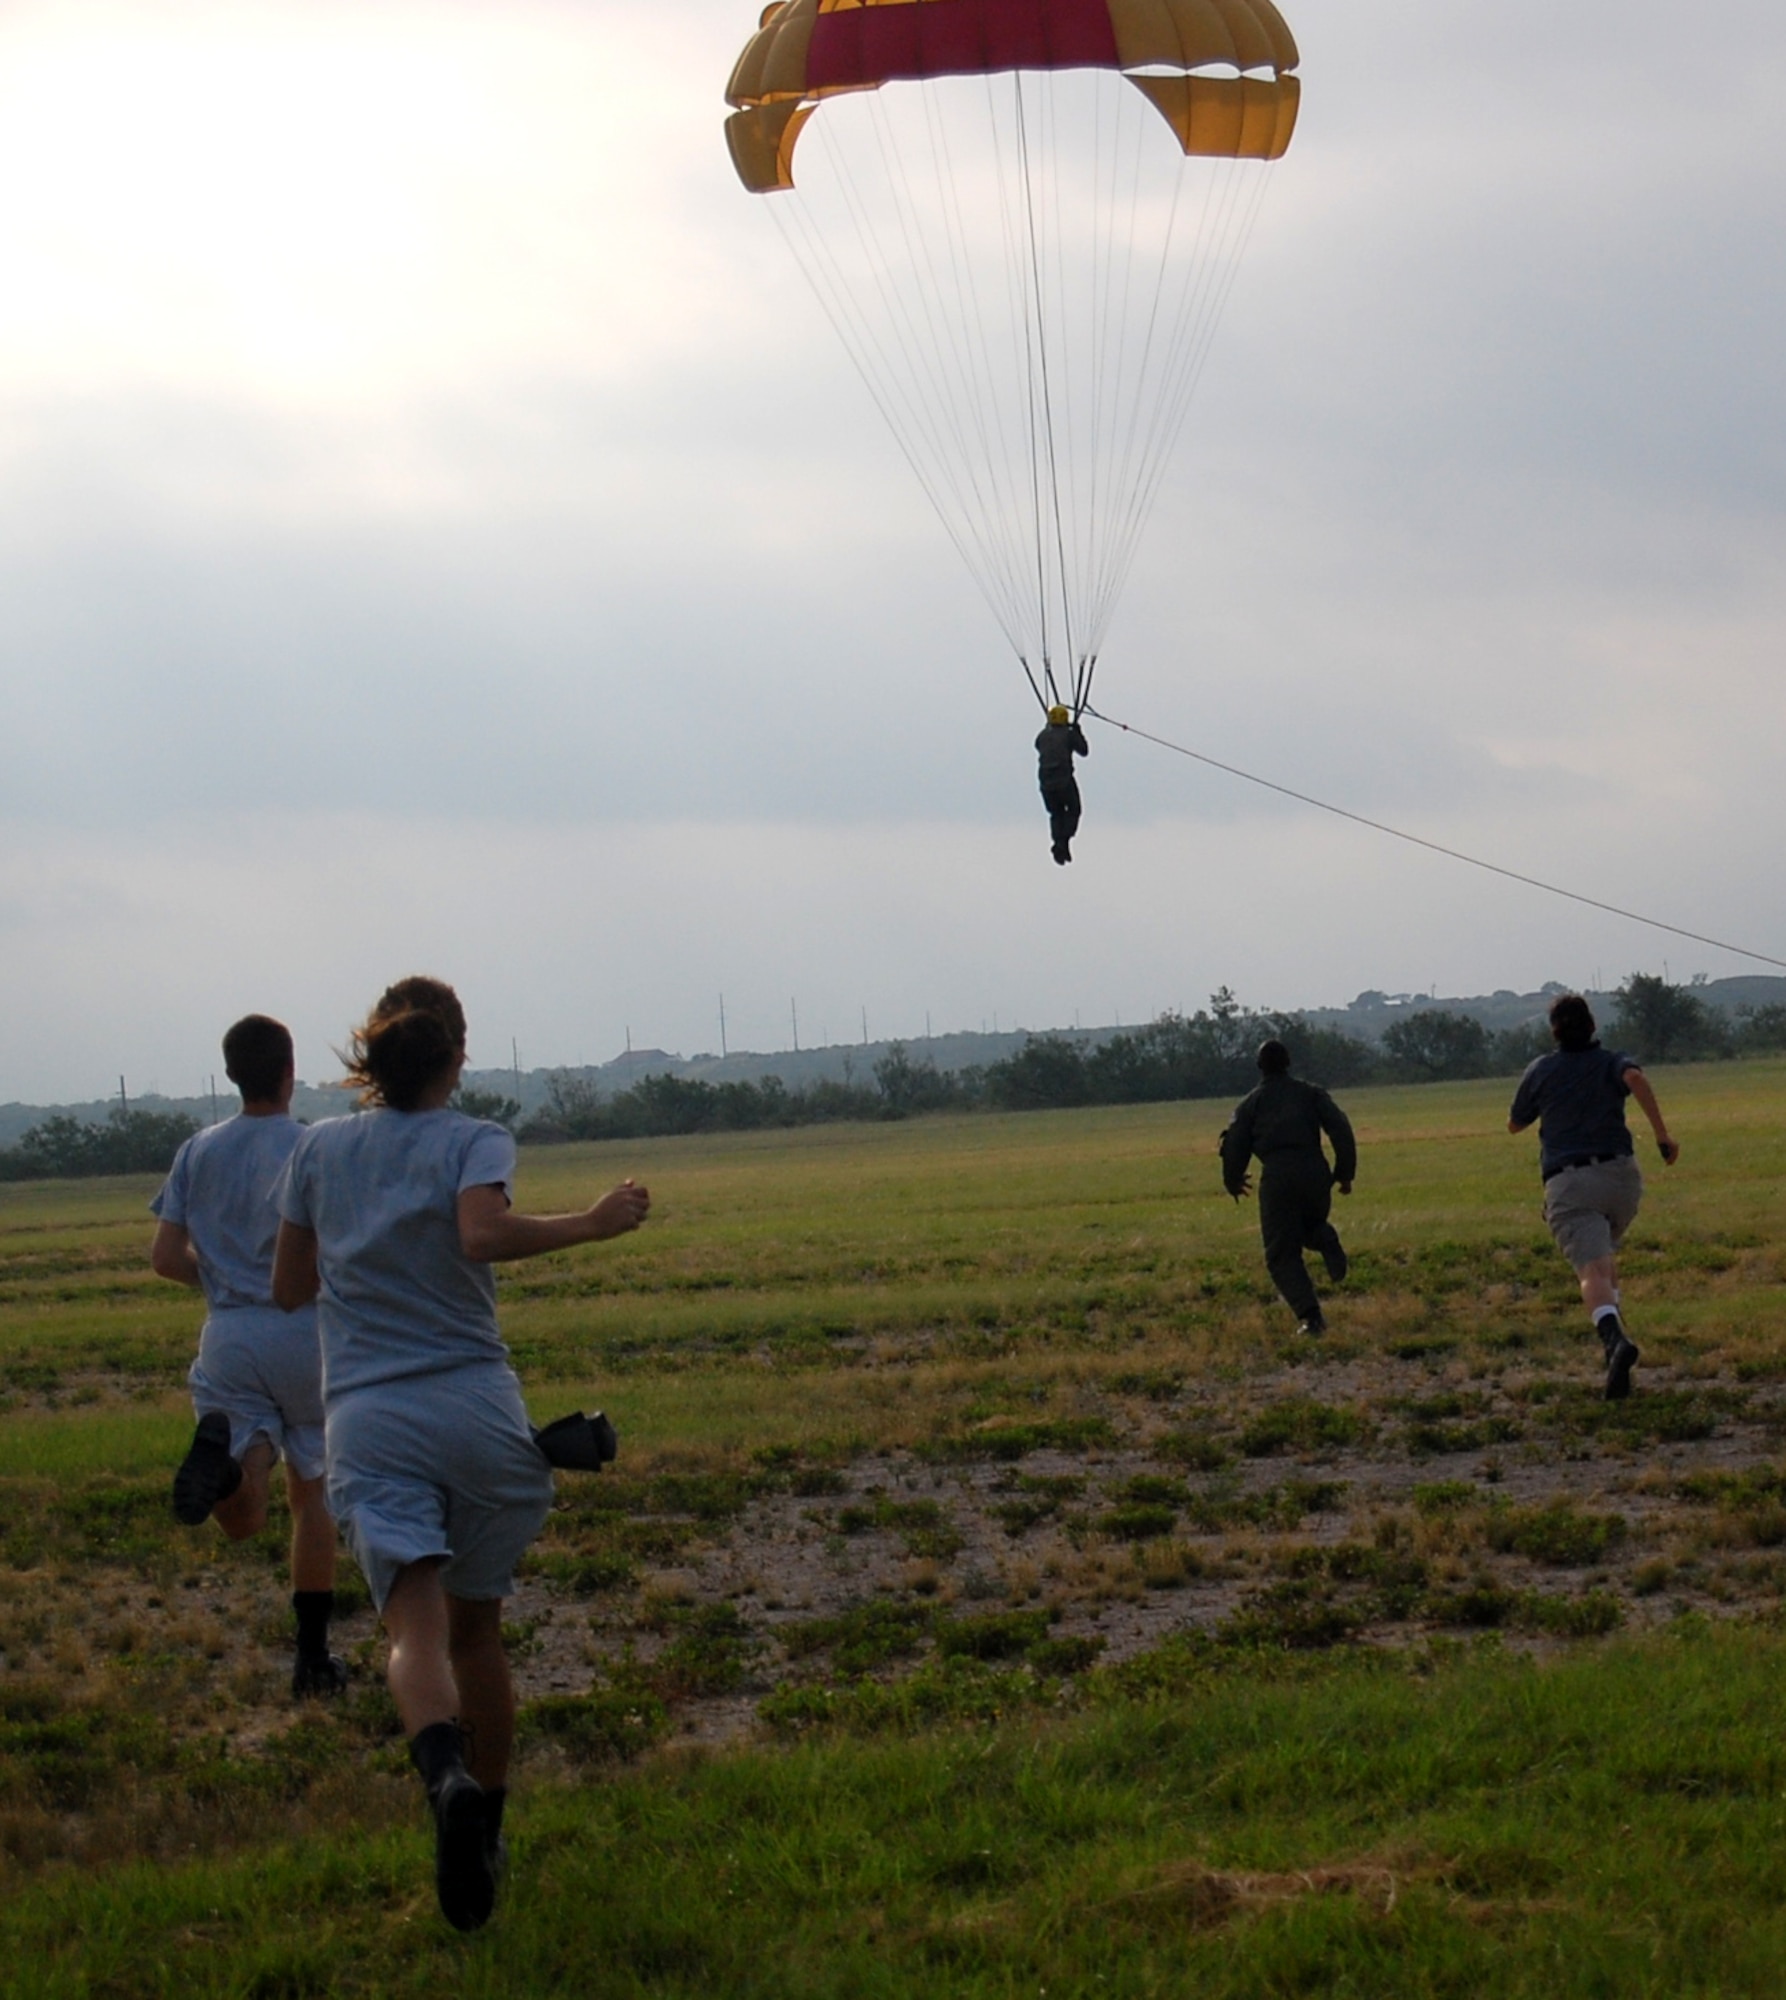 LAUGHLIN AIR FORCE BASE, Texas – Aerospace physiology technicians and their assistants rush to meet 2nd Lt. Seth Butler, SUPT class 08-11, as he touches down after a free fall from 600 feet beneath a parachute.  Students are taught proper landing procedures prior to the parasailing “flights” that ensure they reencounter the ground as safely as possible.  (U.S. Air Force photo by Airman Sara Csurilla)